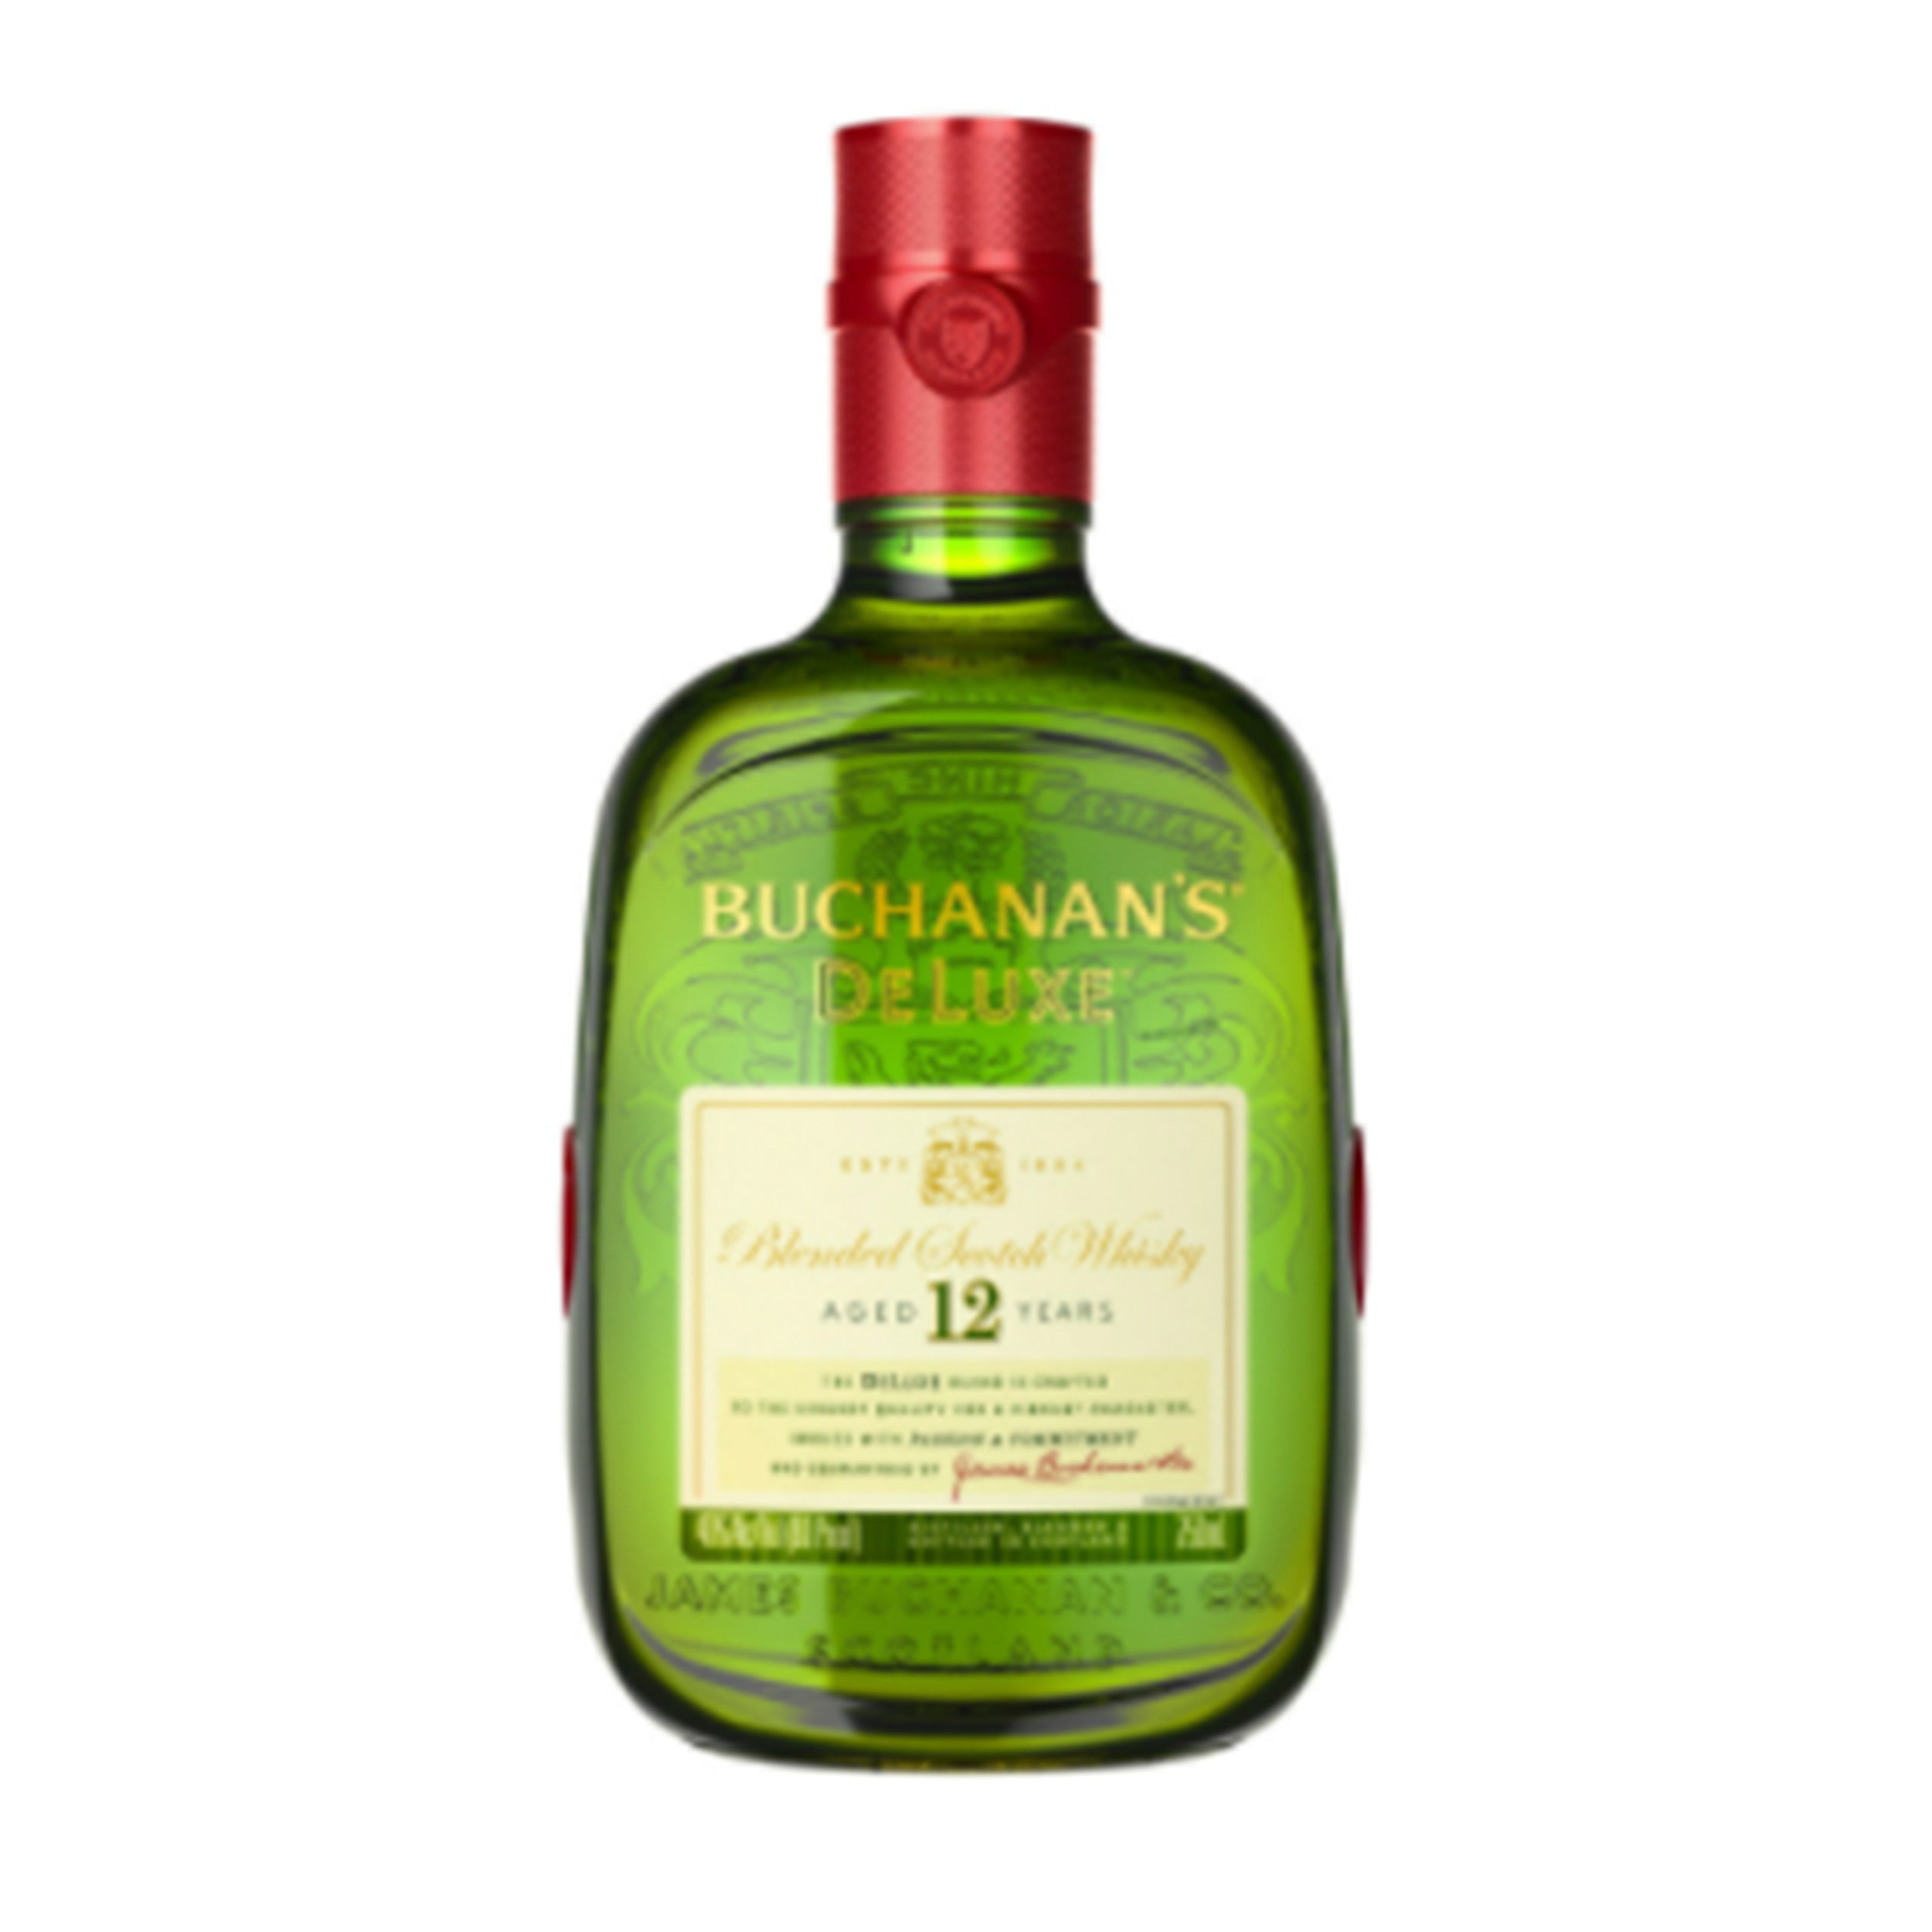 BUCHANAN'S BLENDED SCOTCH DELUXE 12 YR